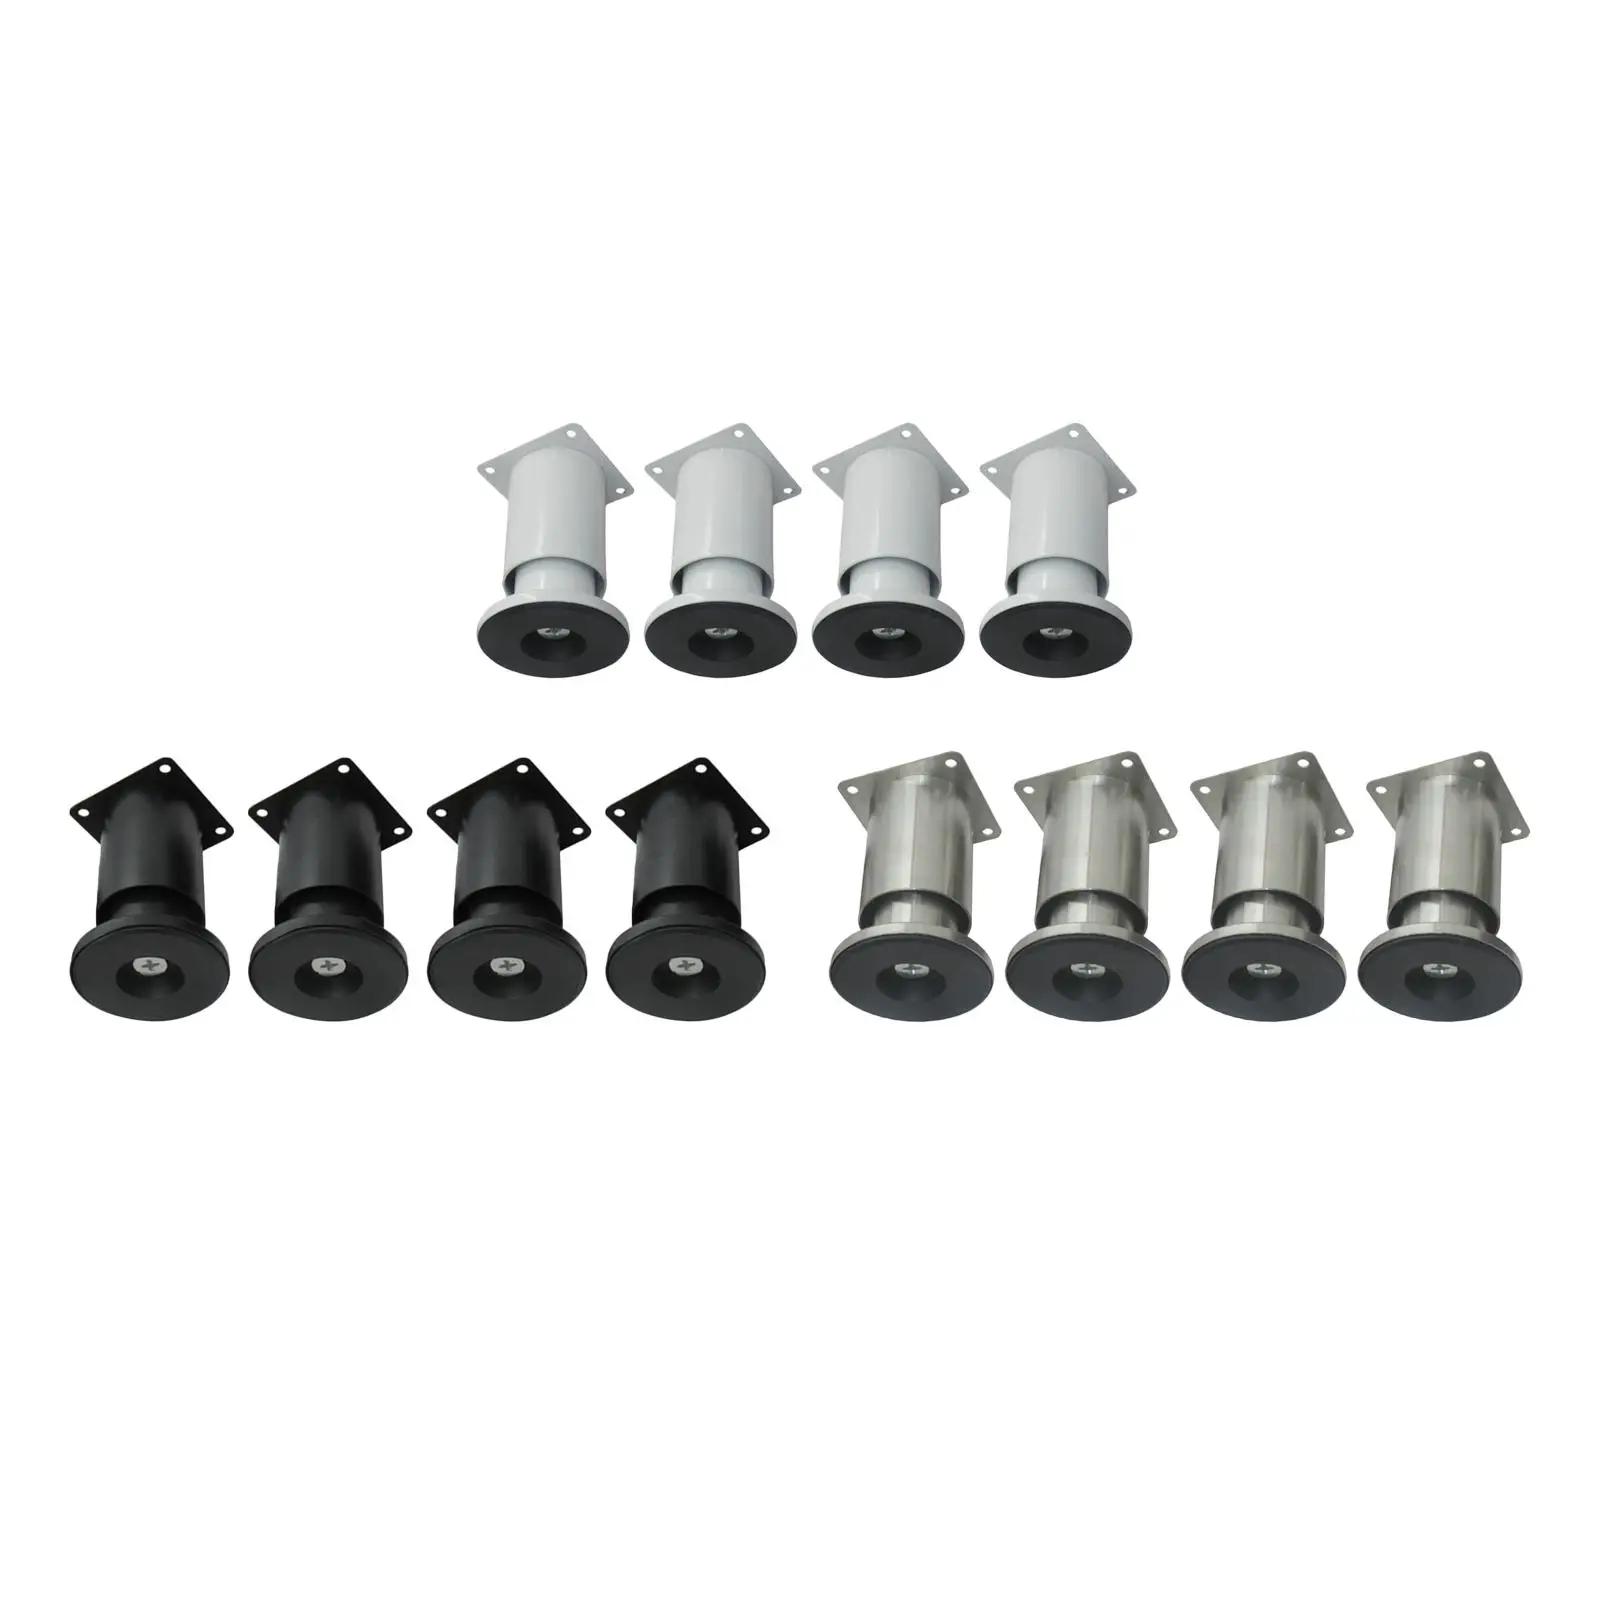 4Pcs Cabinet Foot Legs with Screws Easy to Install Reinforced Bed Supports Legs for Furniture TV Cabinets Shelves Sofas